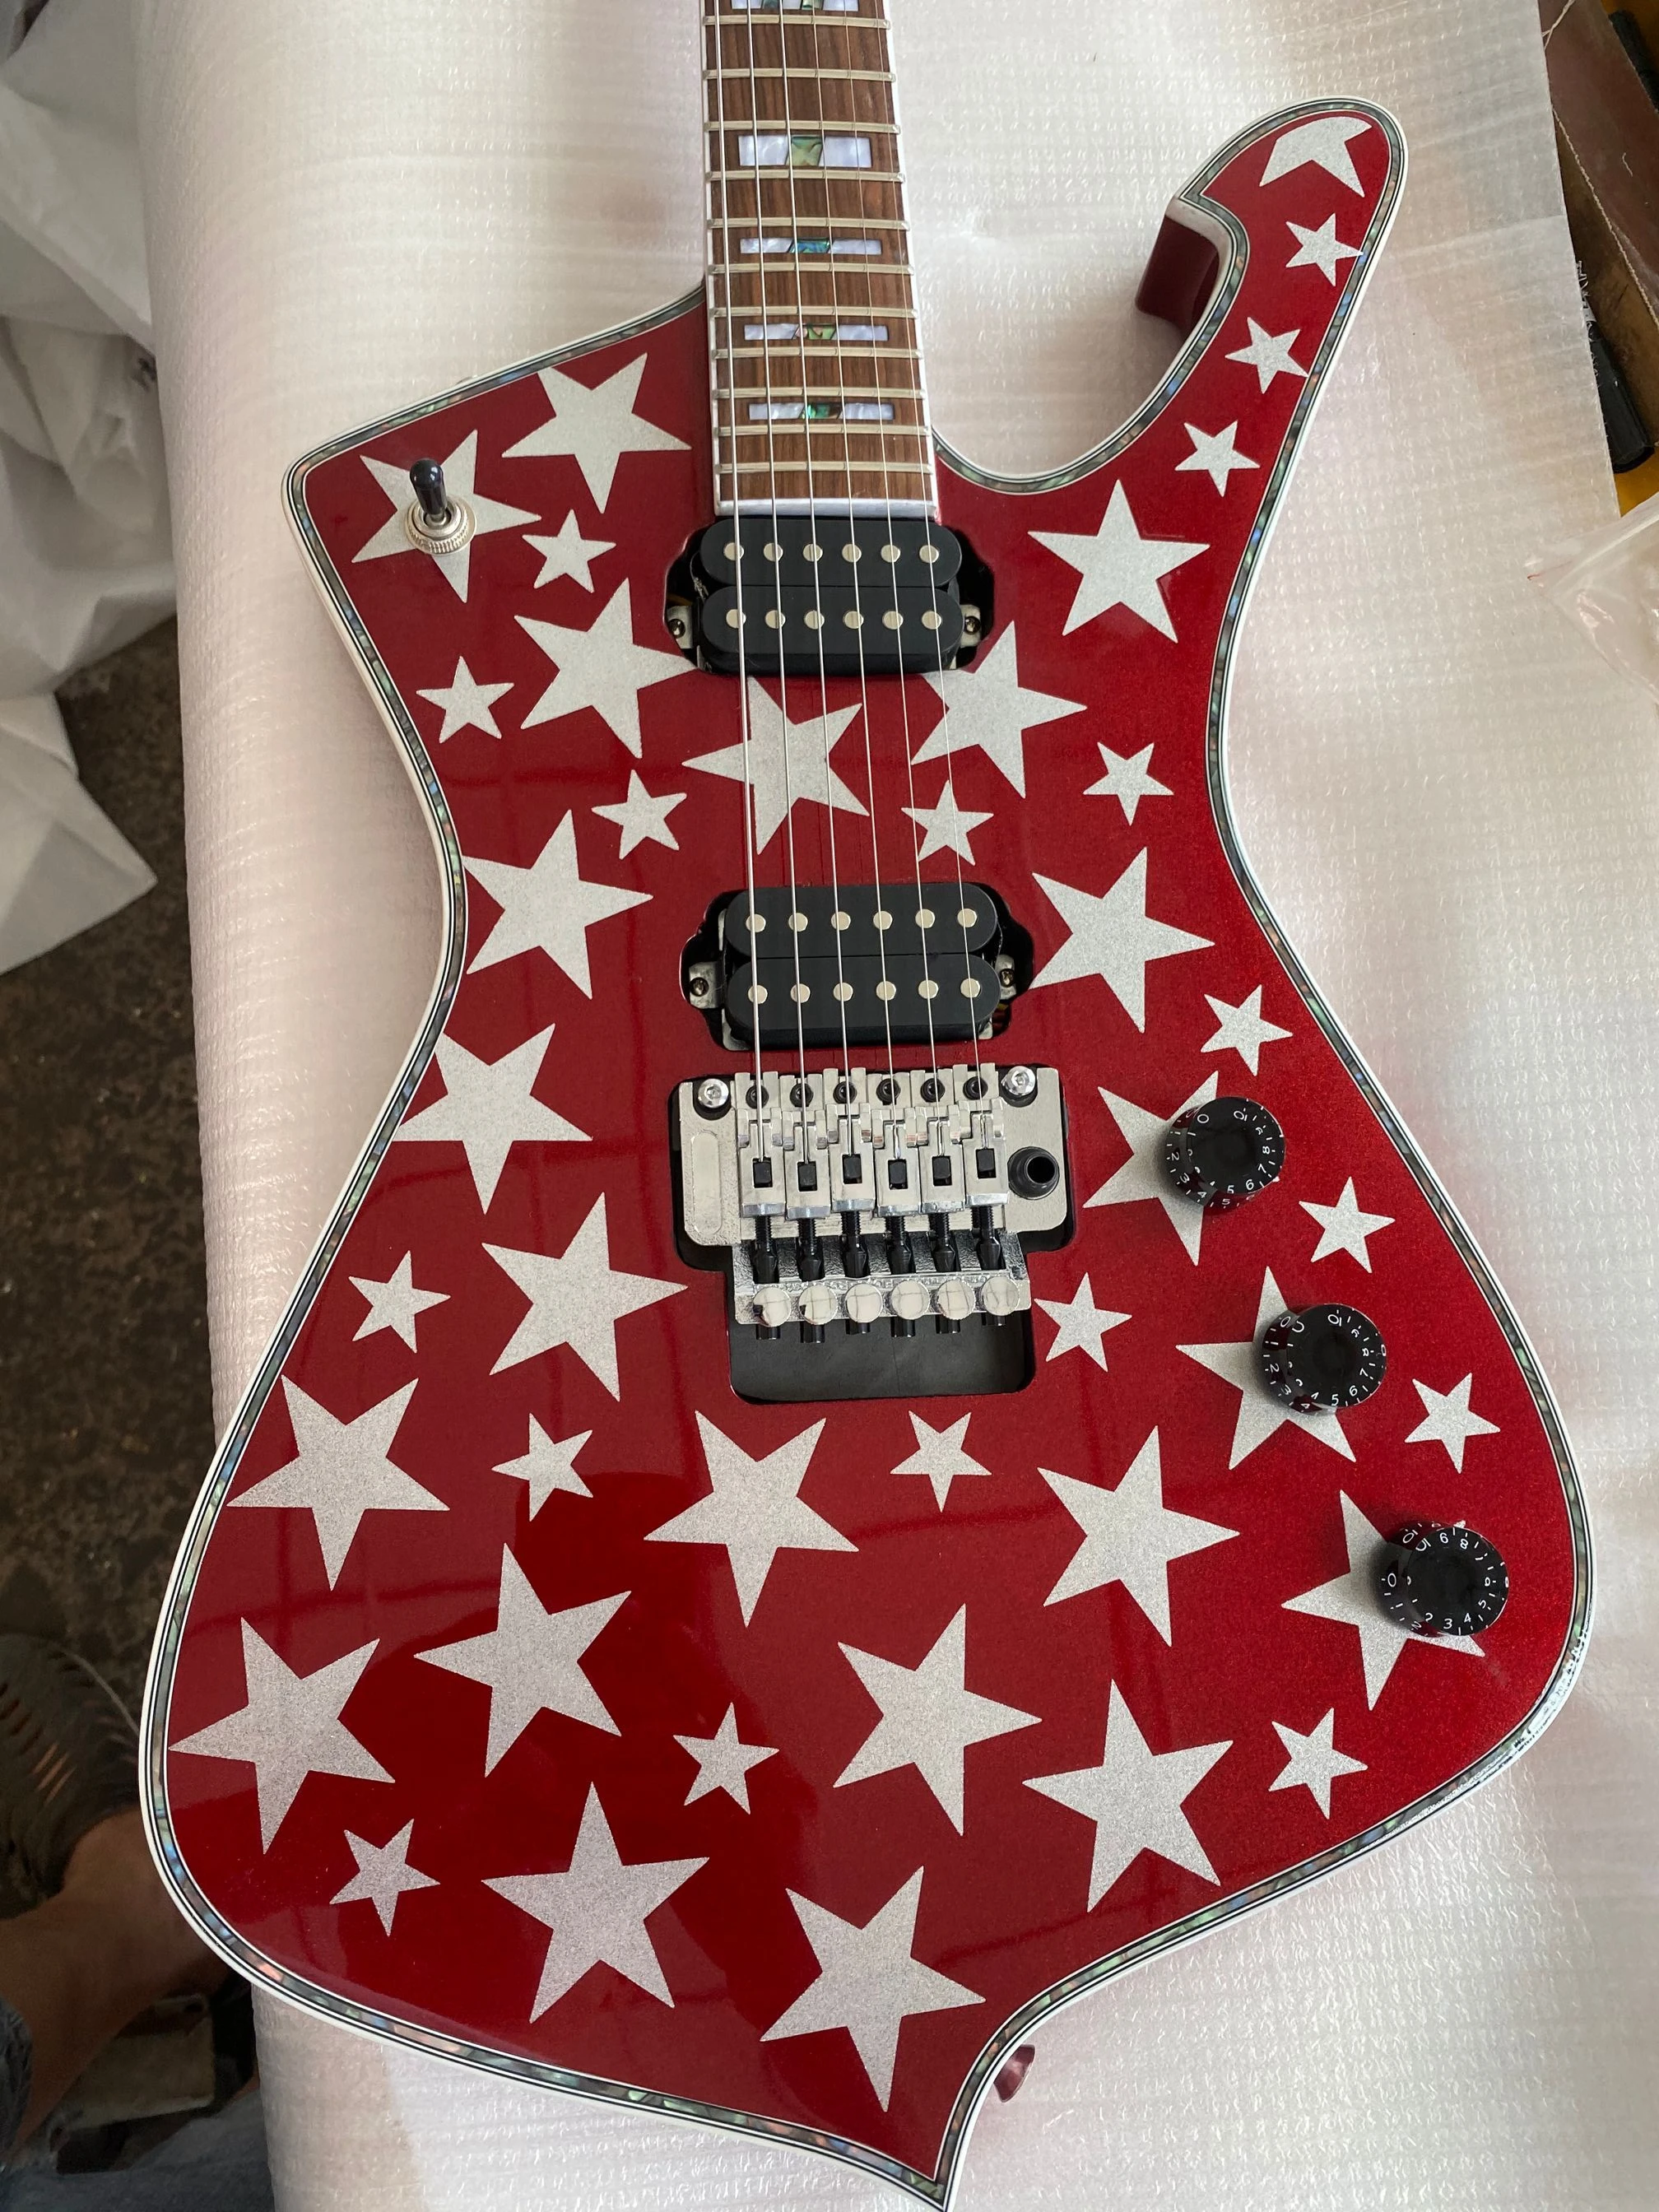 

Rare White Zombie Jay Yuenger ICJ100WZ Iceman Galactic Electric Guitar Metallic REd Silver Star Top, Pearl&Abalone Block Inlay